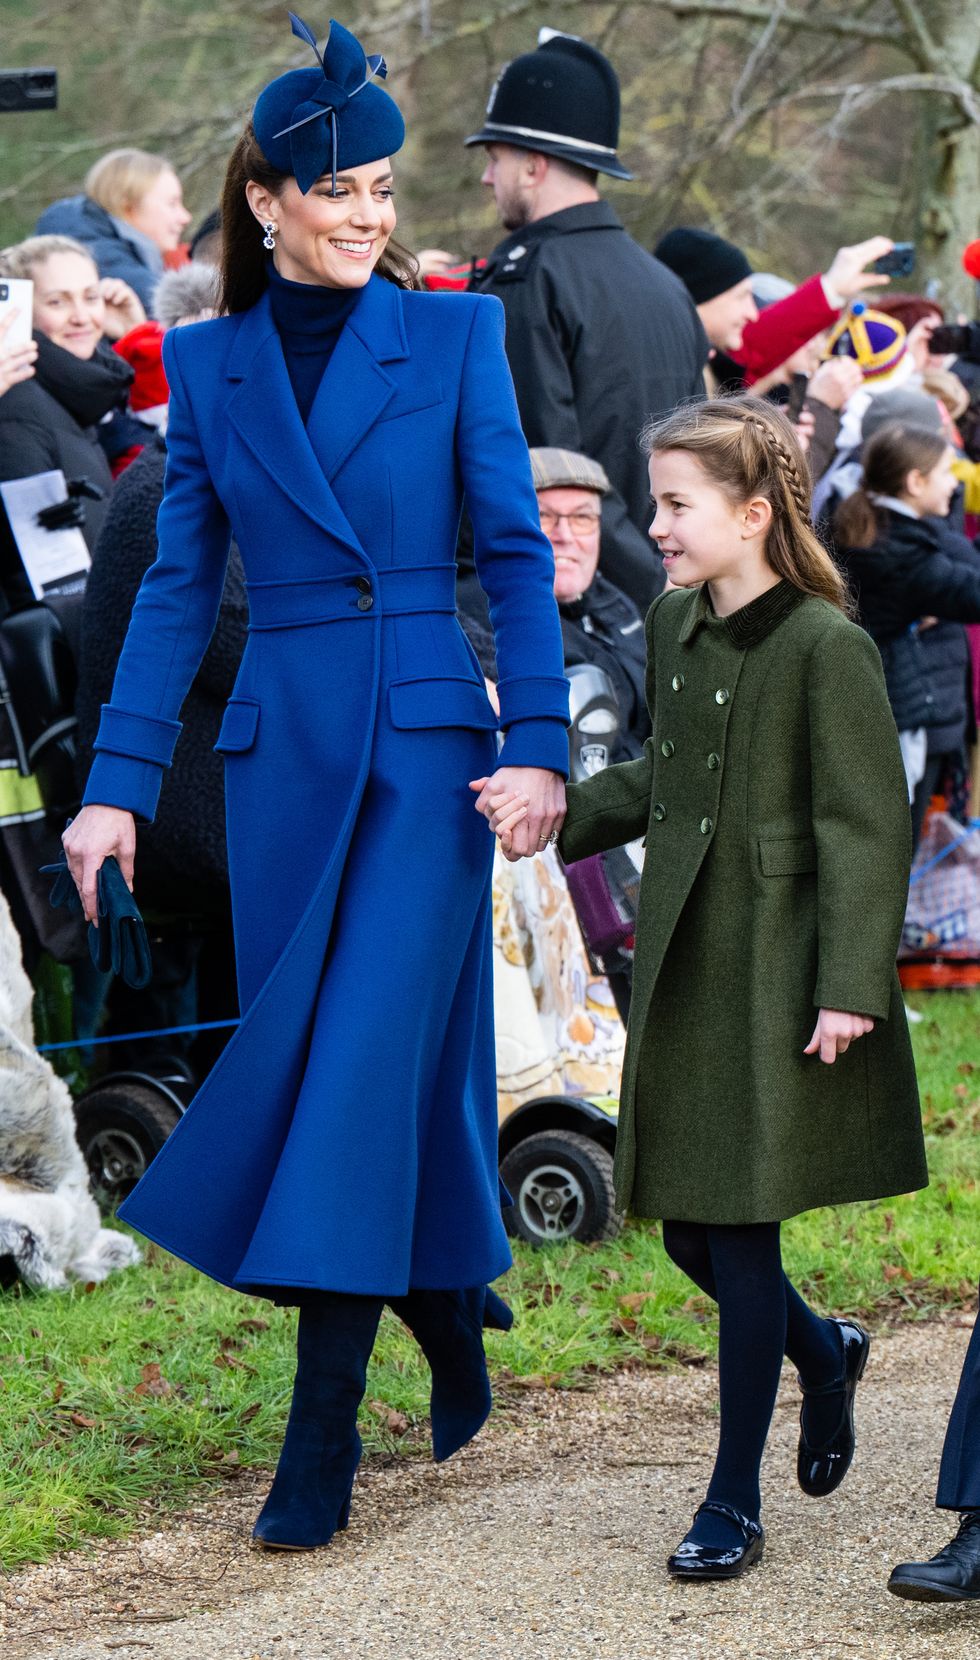 sandringham, norfolk december 25 catherine, princess of wales and princess charlotte of wales attend the christmas morning service at sandringham church on december 25, 2023 in sandringham, norfolk photo by samir husseinwireimage